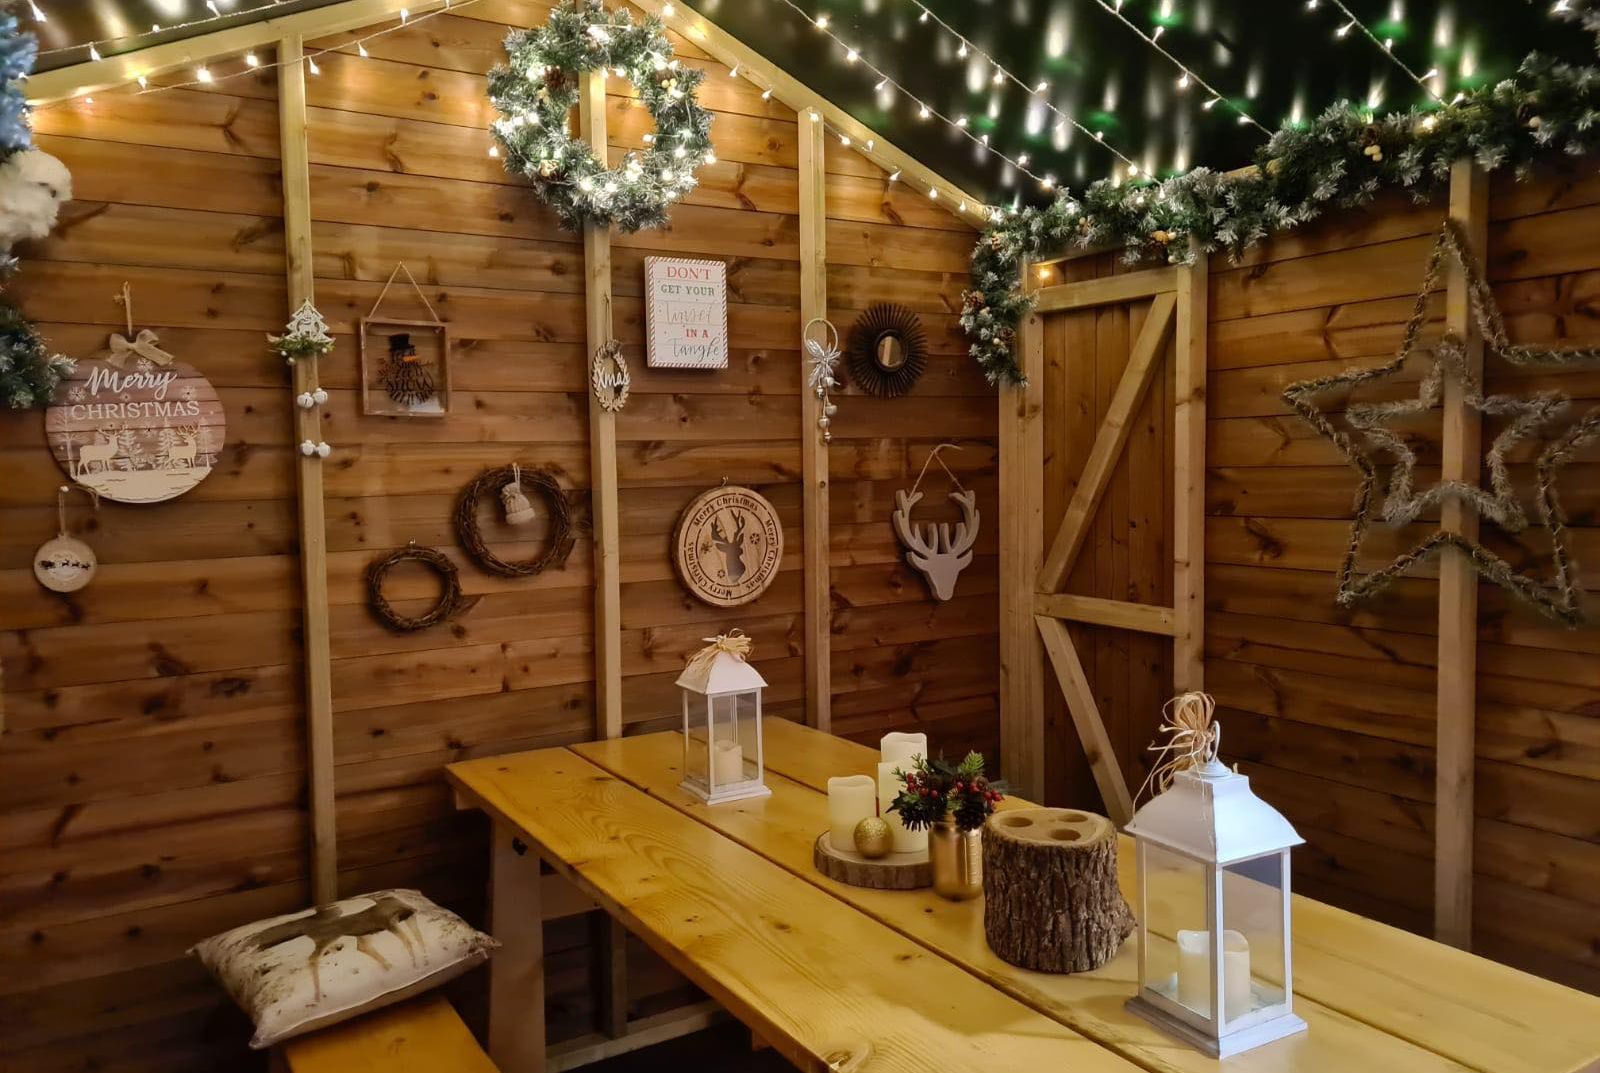 A Christmas Chalet at Southport Market, which has been decorated by Fantasy Weddings